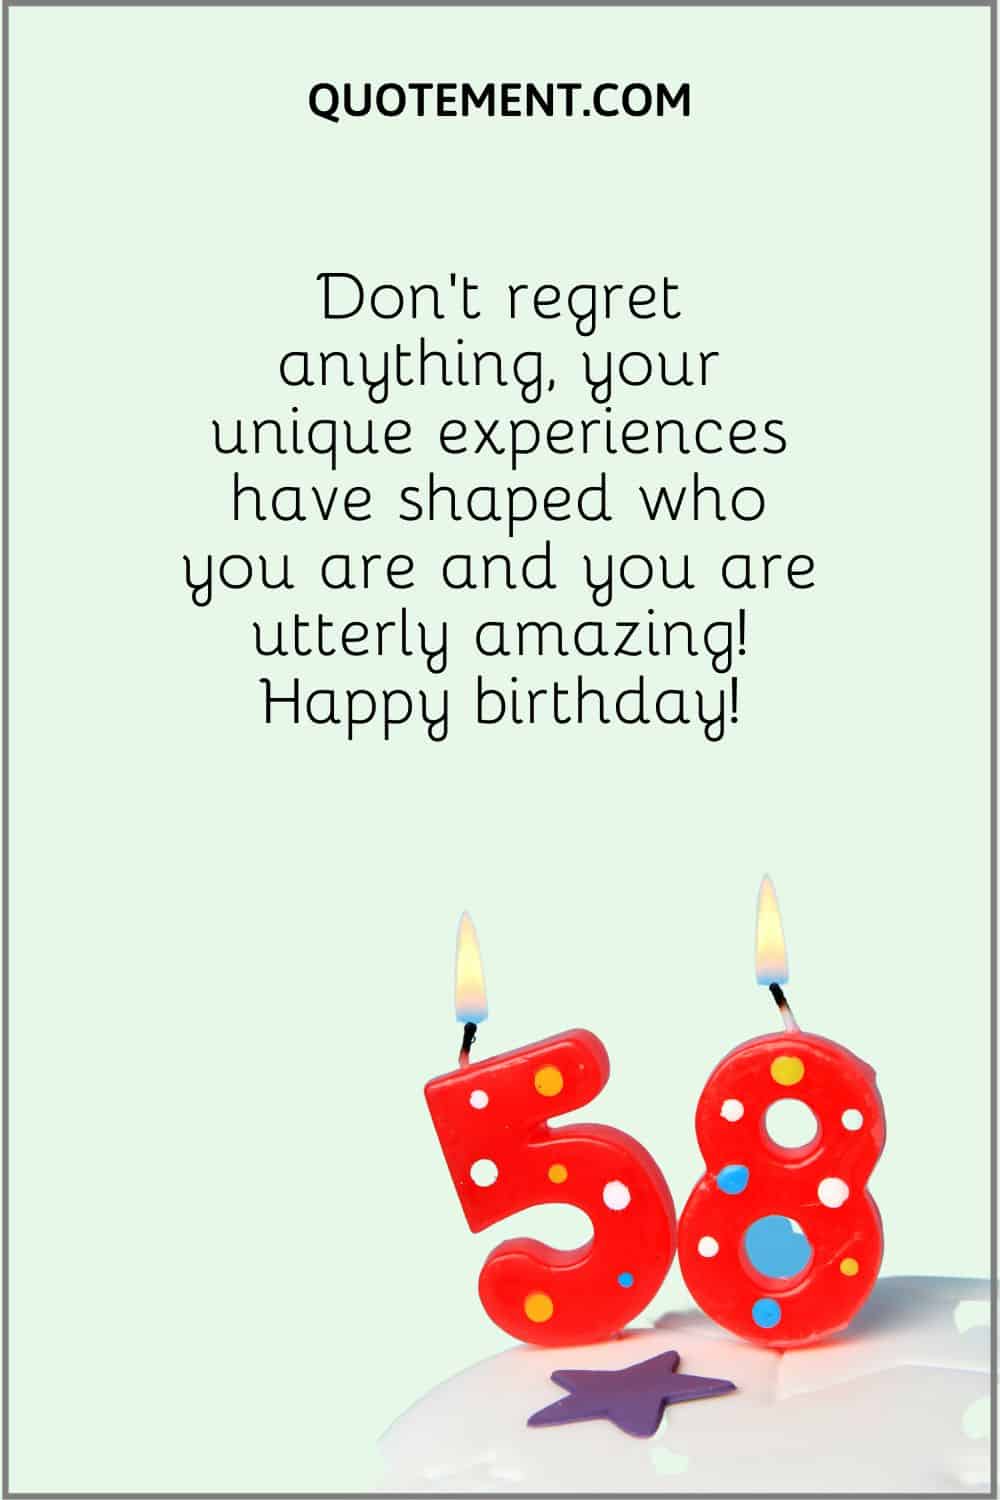 “Don’t regret anything, your unique experiences have shaped who you are and you are utterly amazing! Happy birthday!”